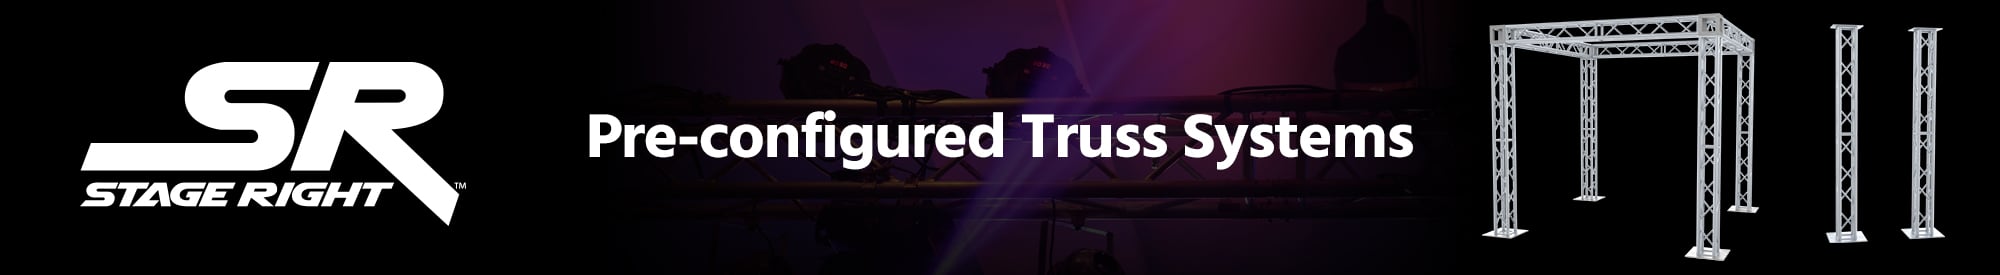 Stage Right Preconfigured Truss Systems